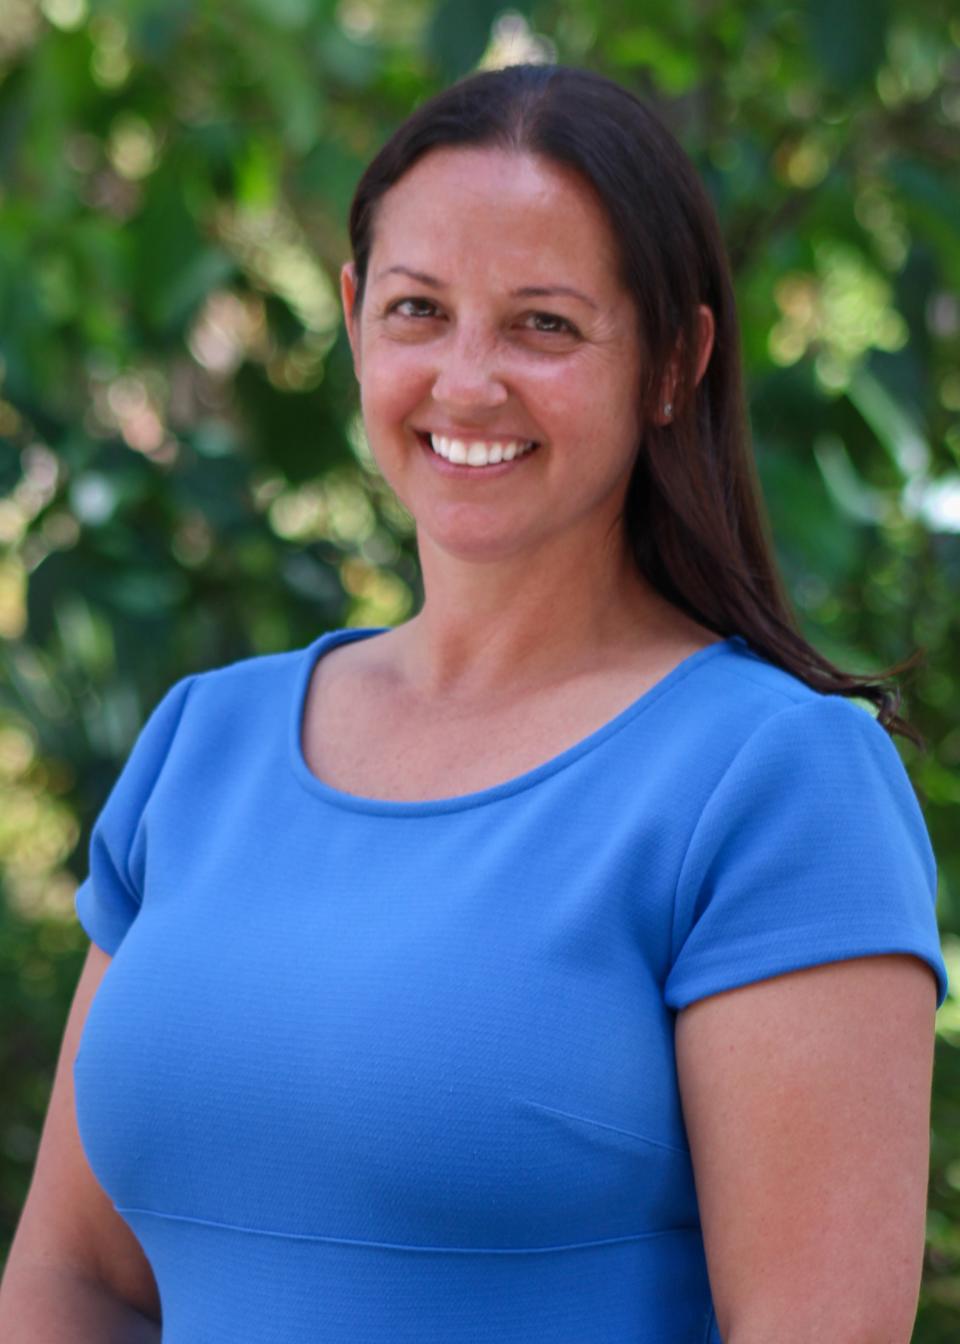 Marya Annicelli, as seen in her district headshot.